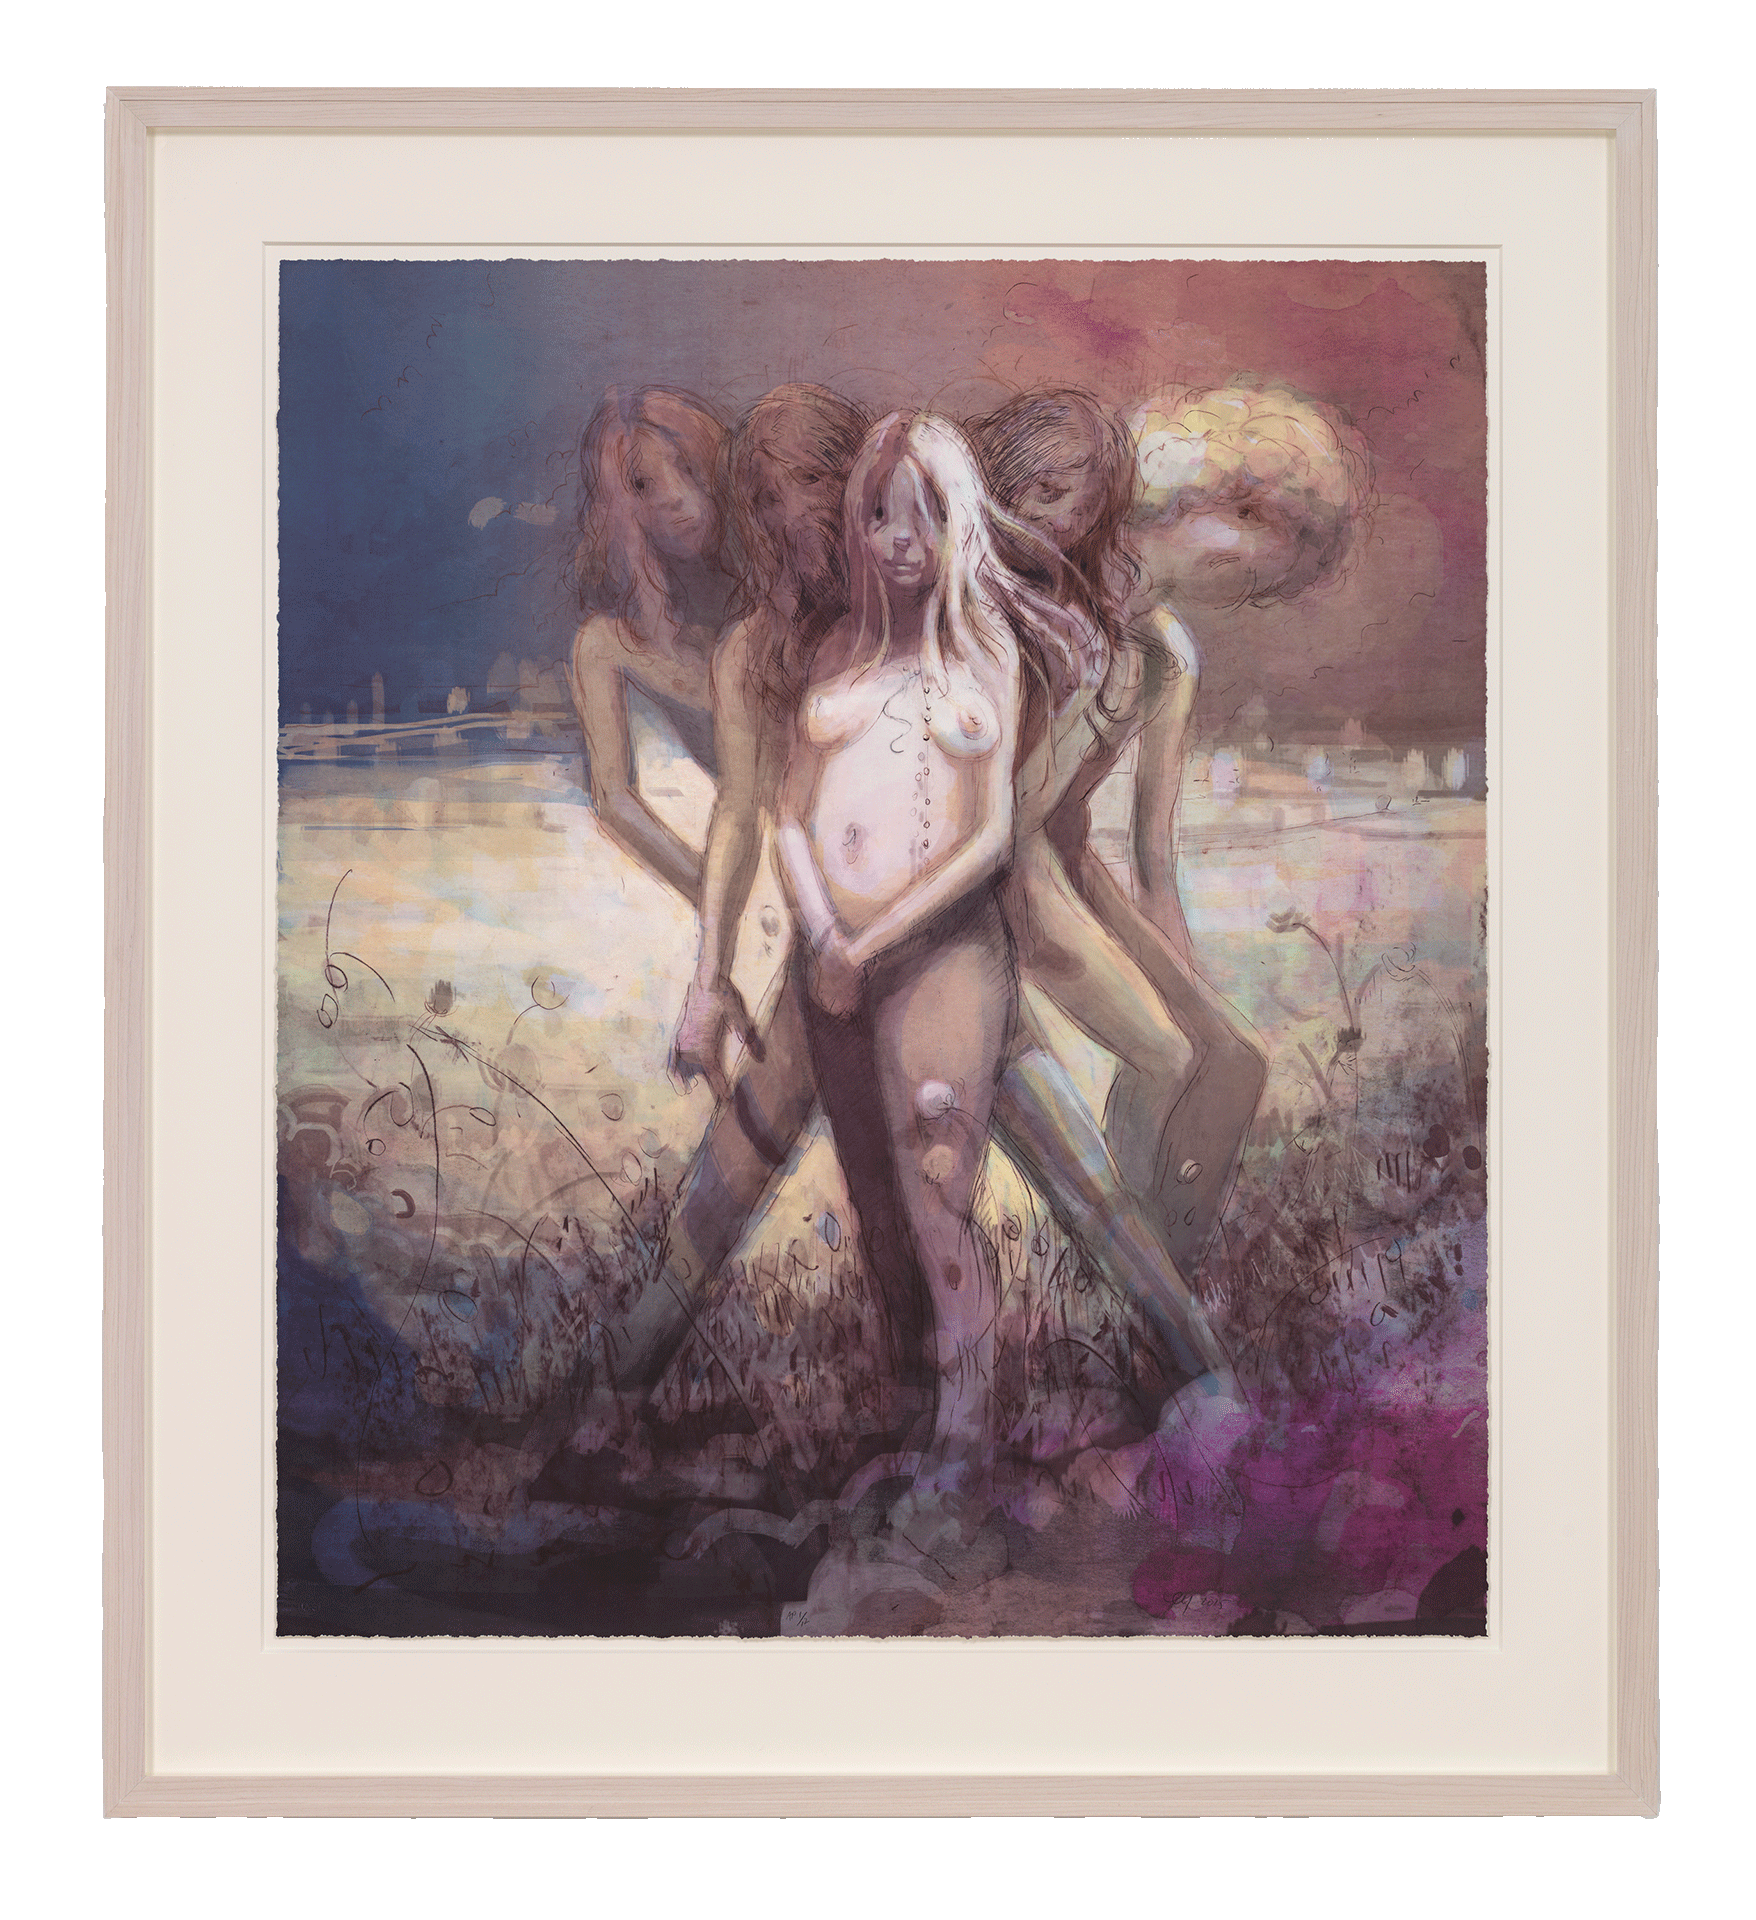 A framed print by Lisa Yuskavage, titled Hippies in Tit Heaven, dated 2015.